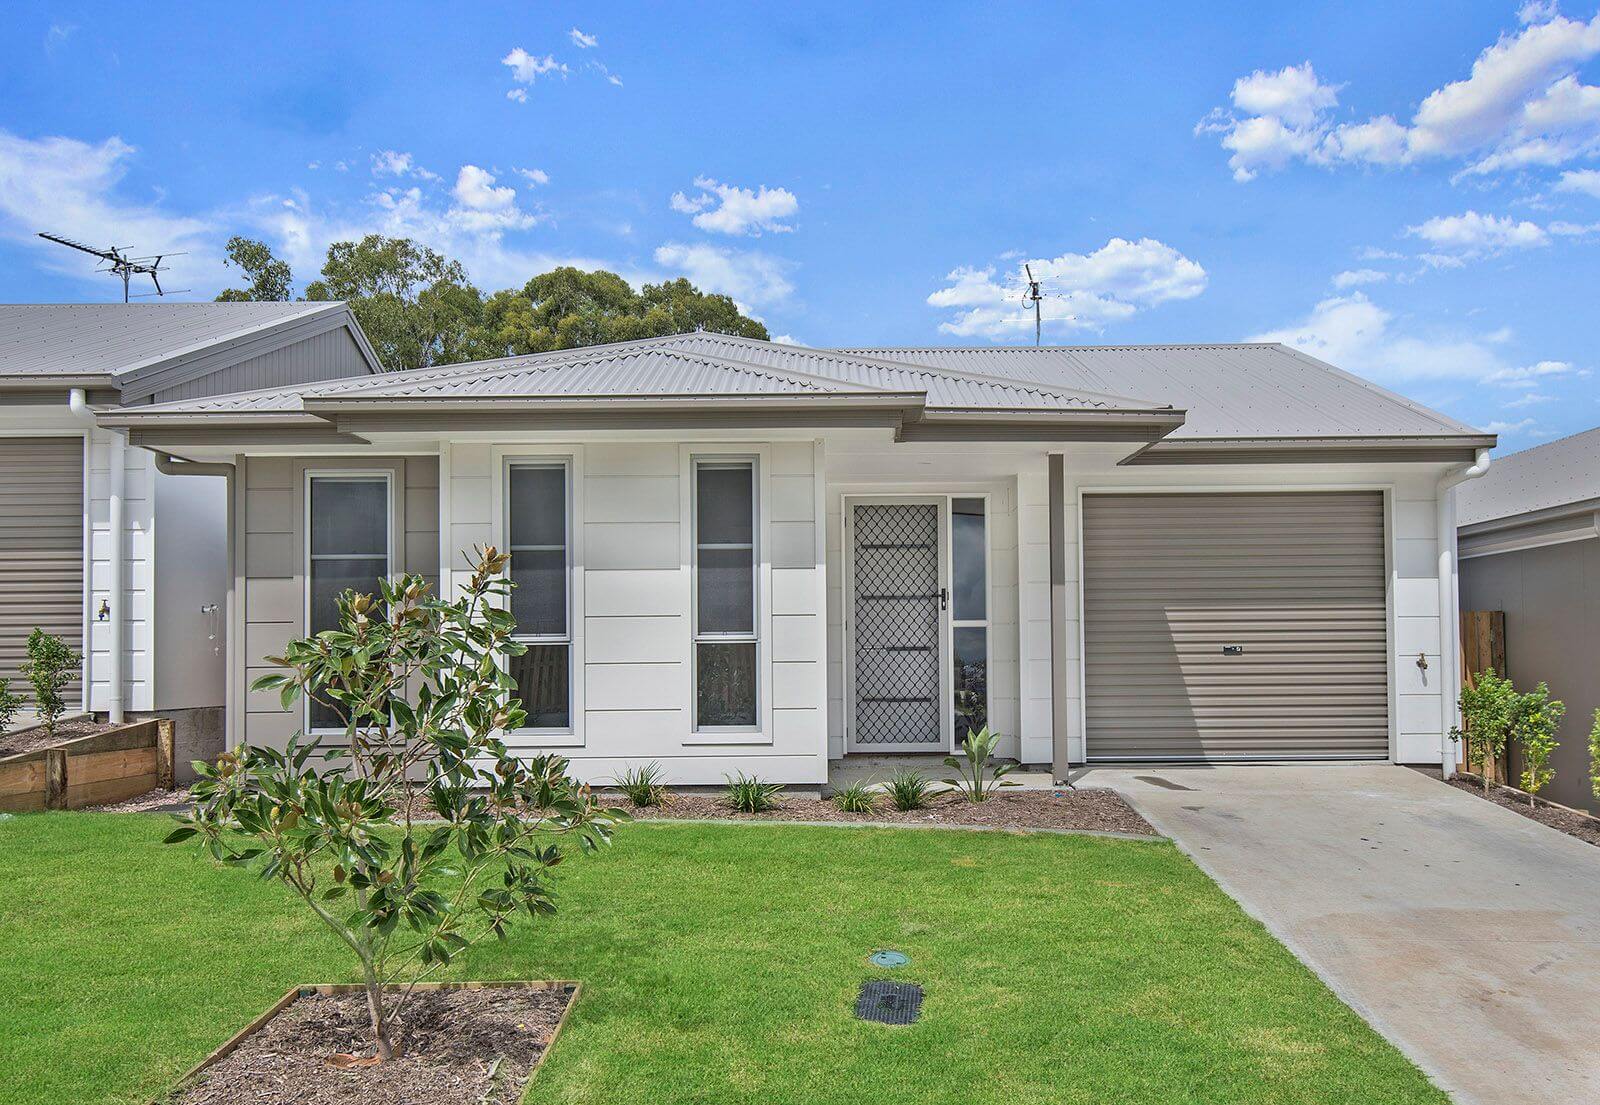 Sold Townhouse 2/70 Willow Road, Redbank Plains QLD 4301 - Aug 5, 2022 ...